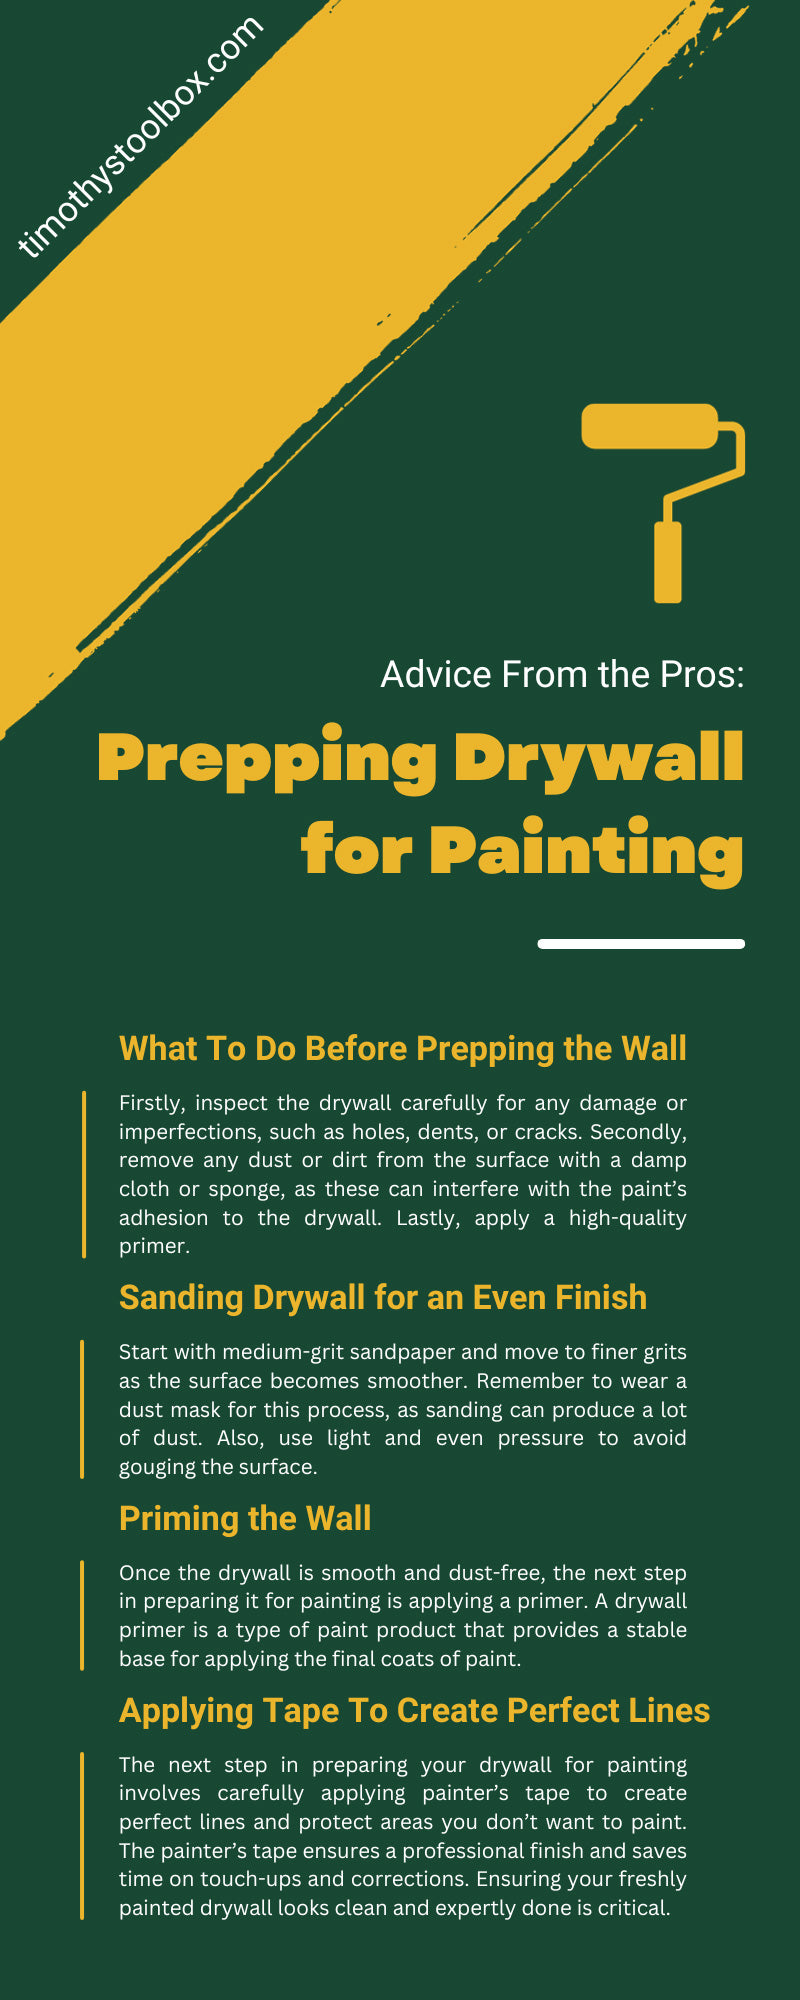 Advice From the Pros: Prepping Drywall for Painting